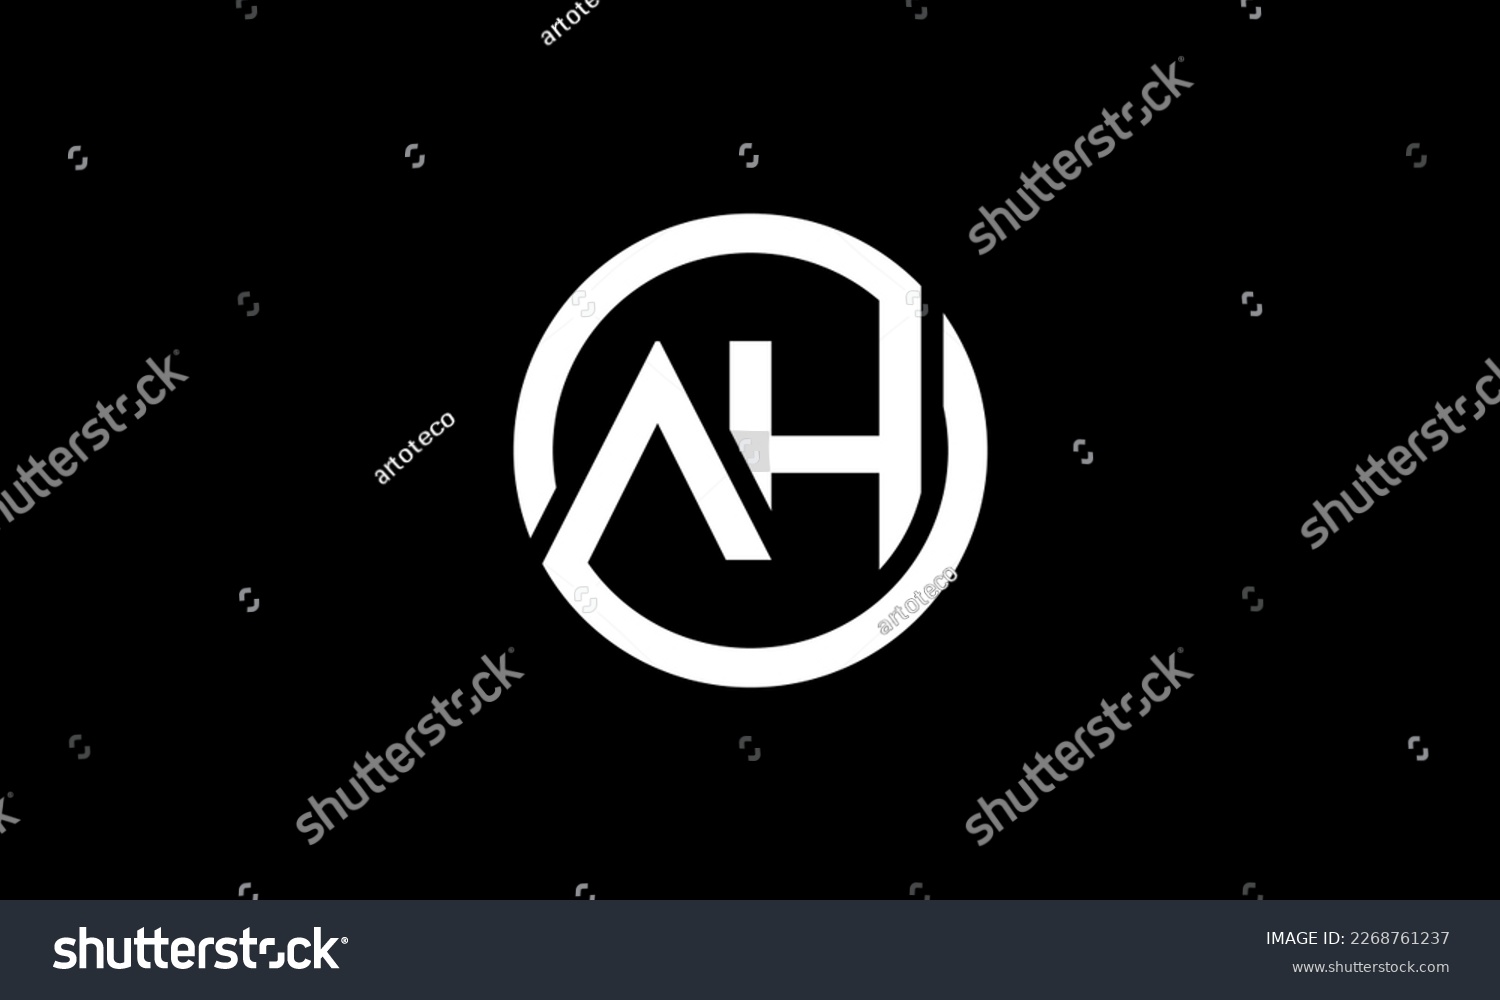 SVG of A and H logo connecting circle svg